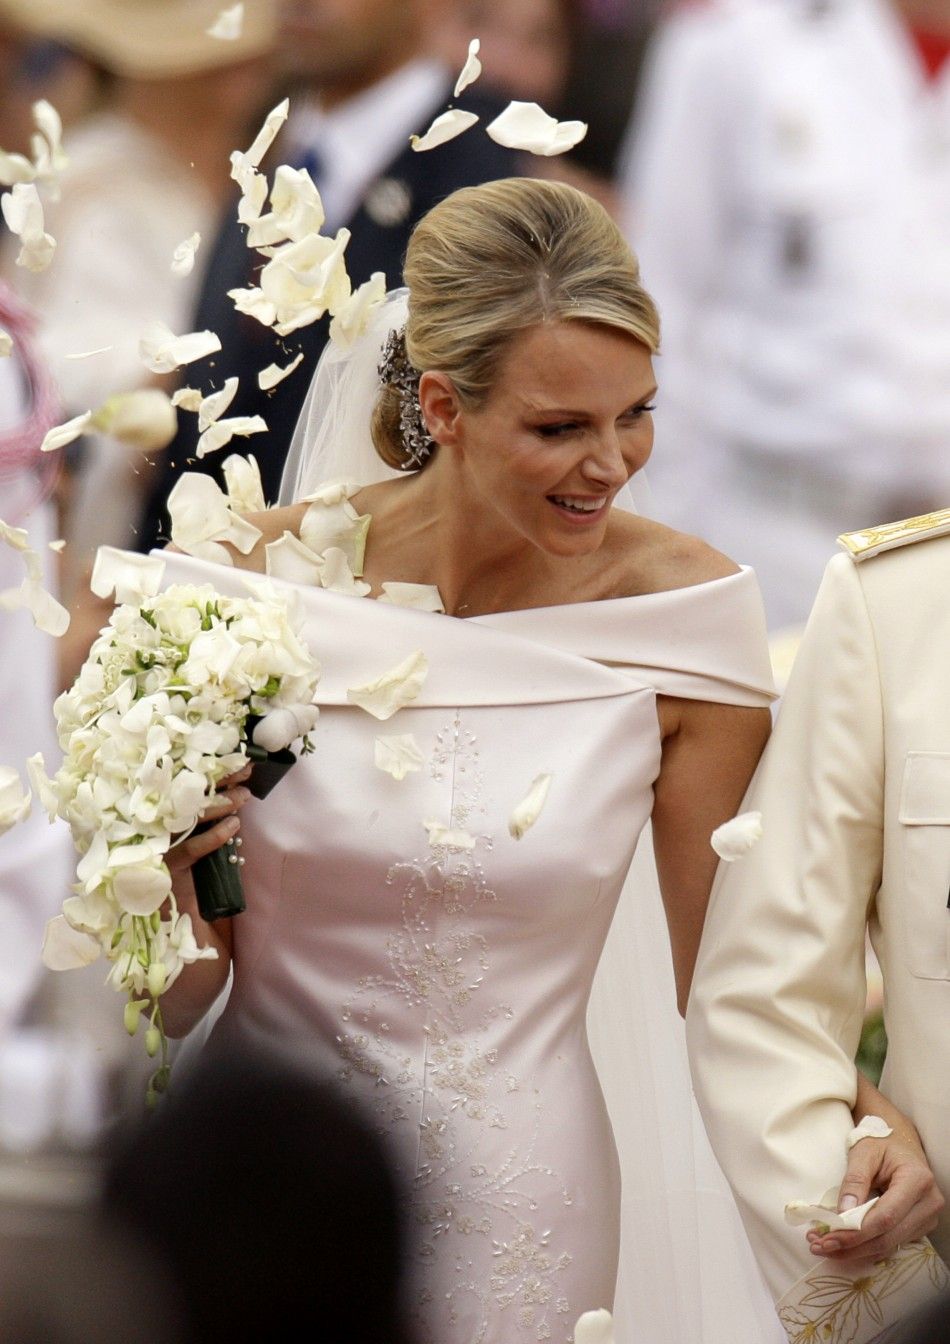 Princess Charlene of Monaco smiles as she departs from the Monaco palace after their religious wedding ceremony in Monaco